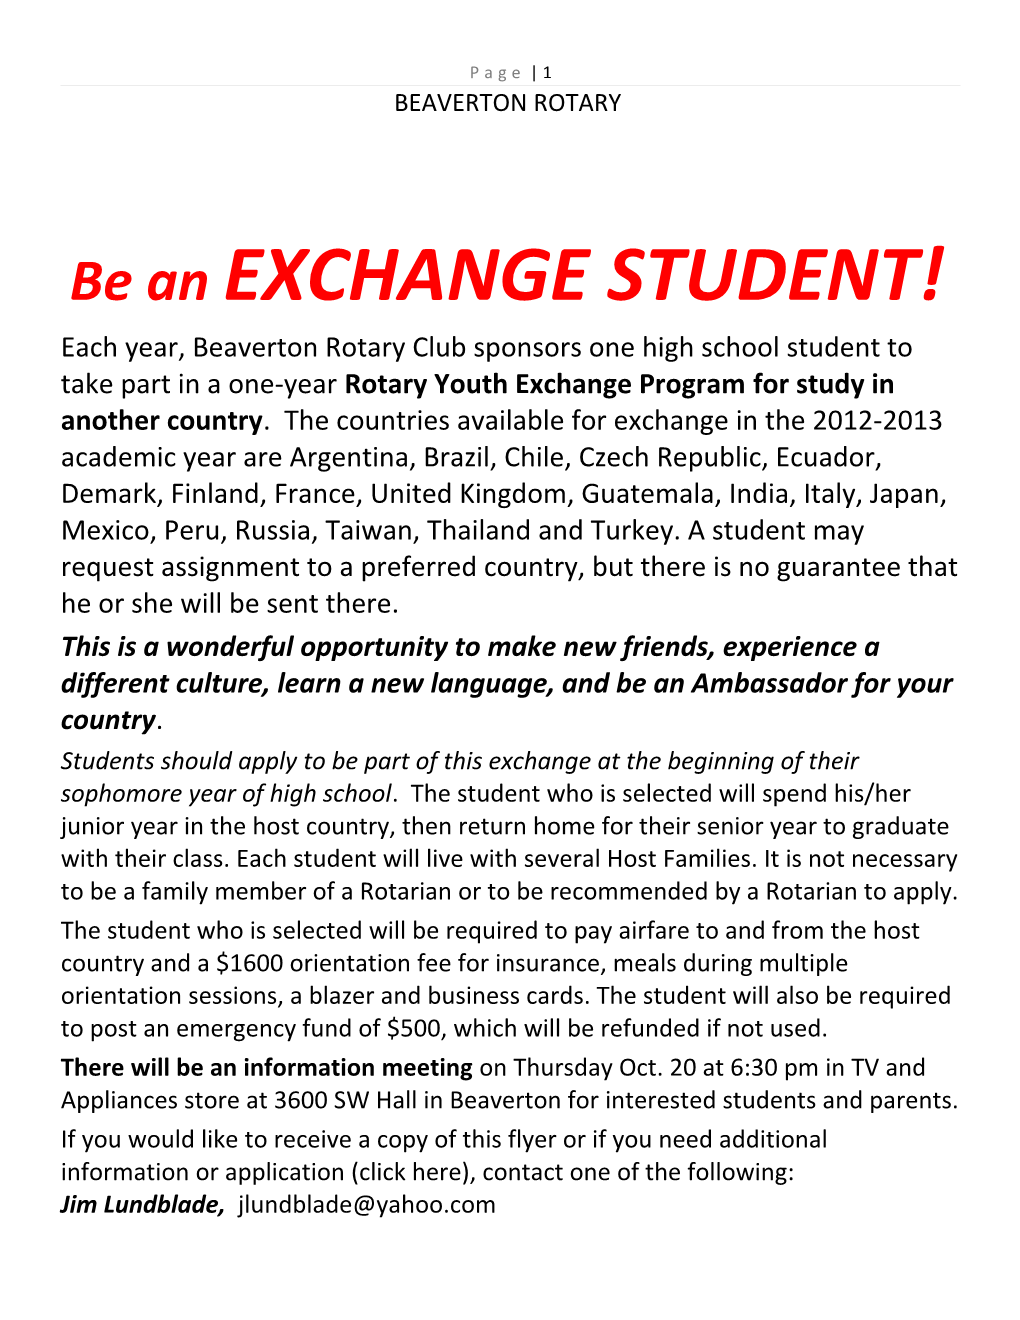 Be an EXCHANGE STUDENT!